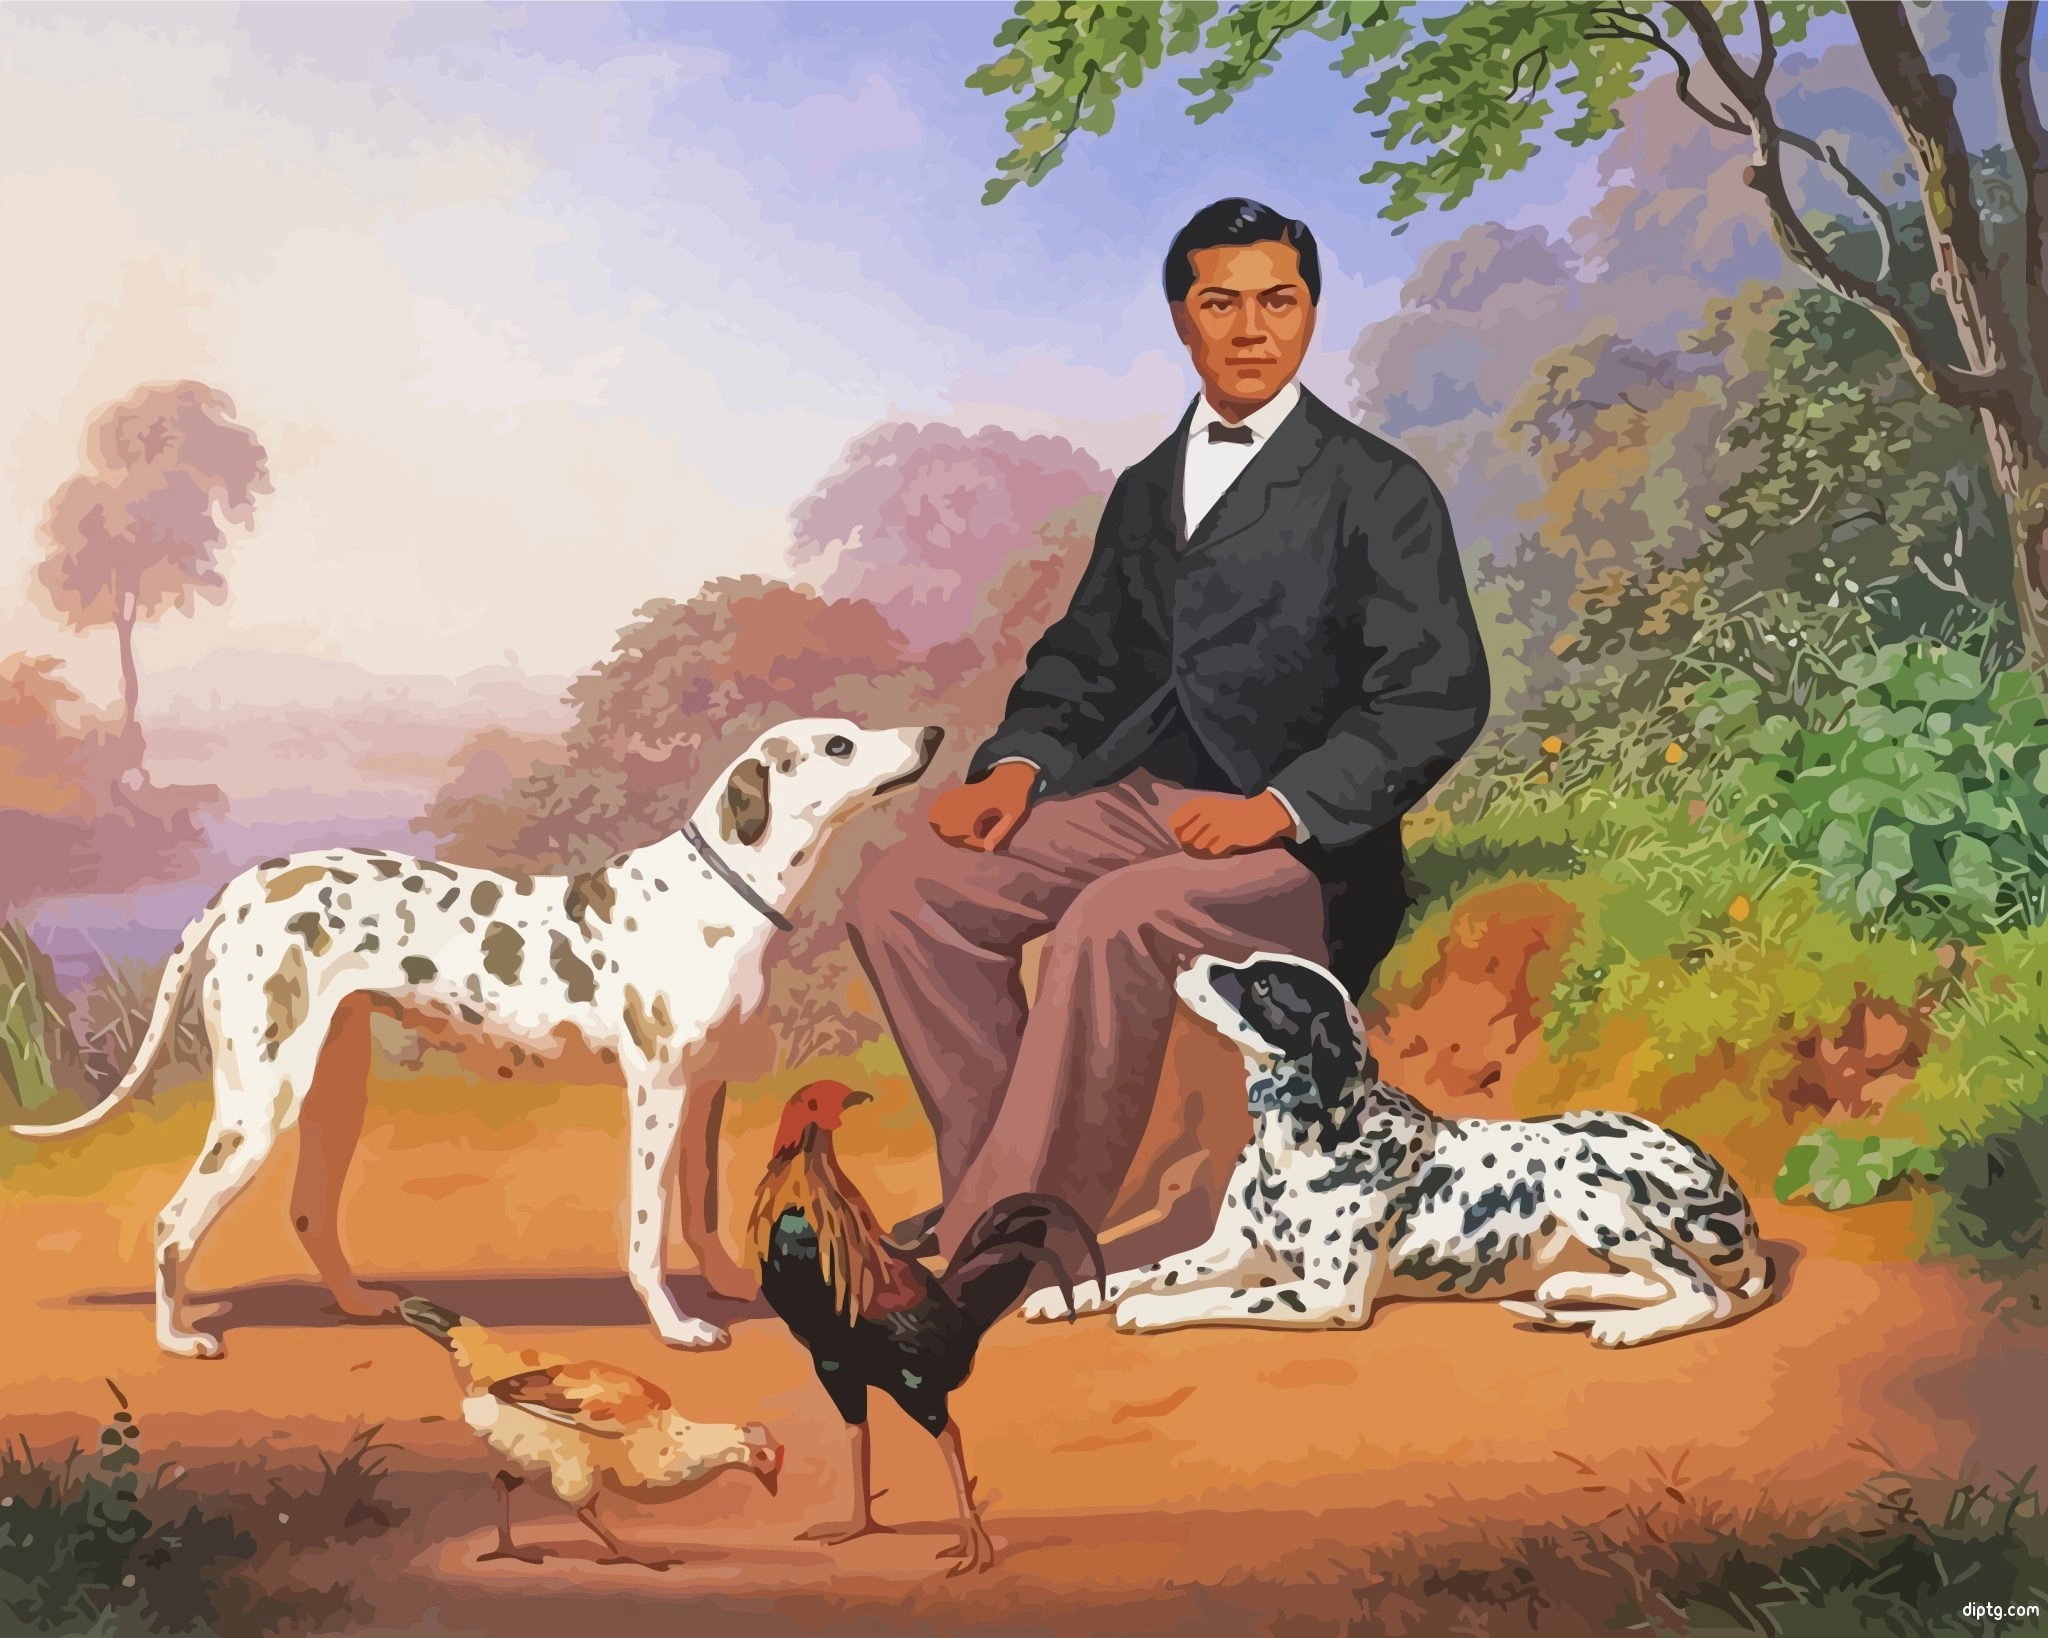 Man With Dalmatians And Chickens Painting By Numbers Kits.jpg